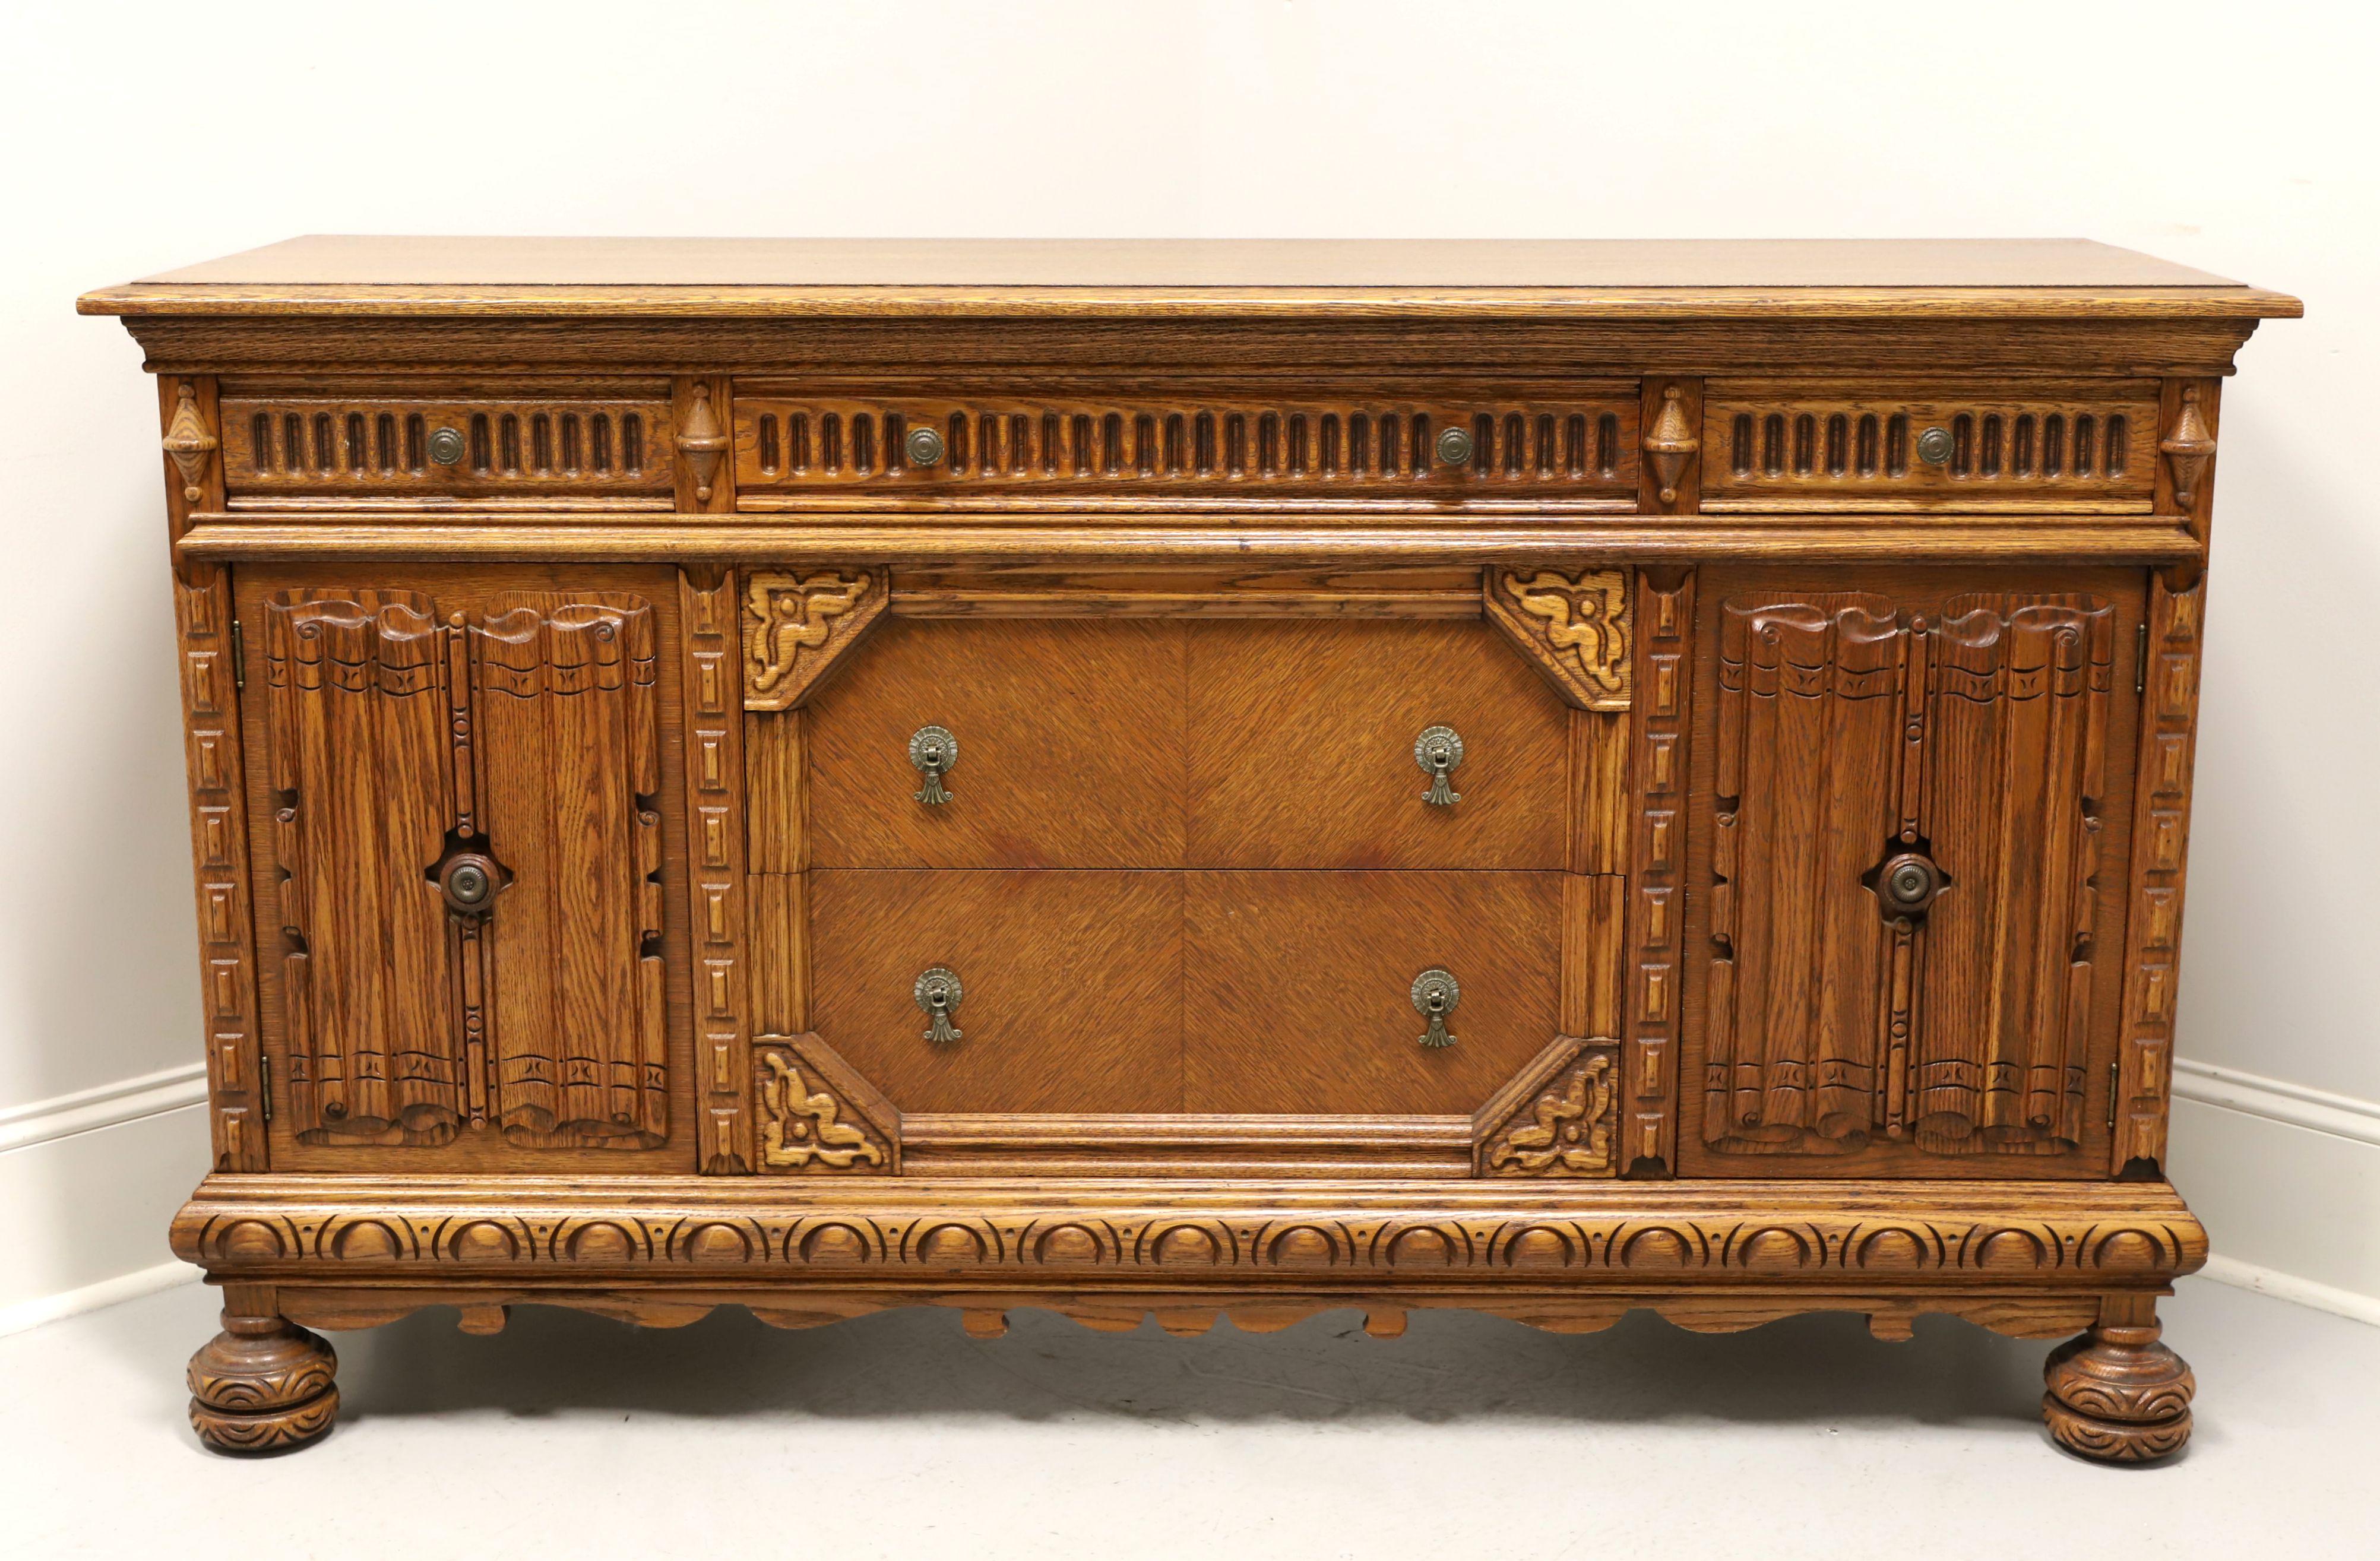 A late 20th century reproduction of a Jacobean Revival style sideboard, unbranded. Oak and oak veneers, decorative metal hardware, carved upper drawer & door fronts, inlaid lower drawer fronts, carved sides & apron and carved bun front feet.